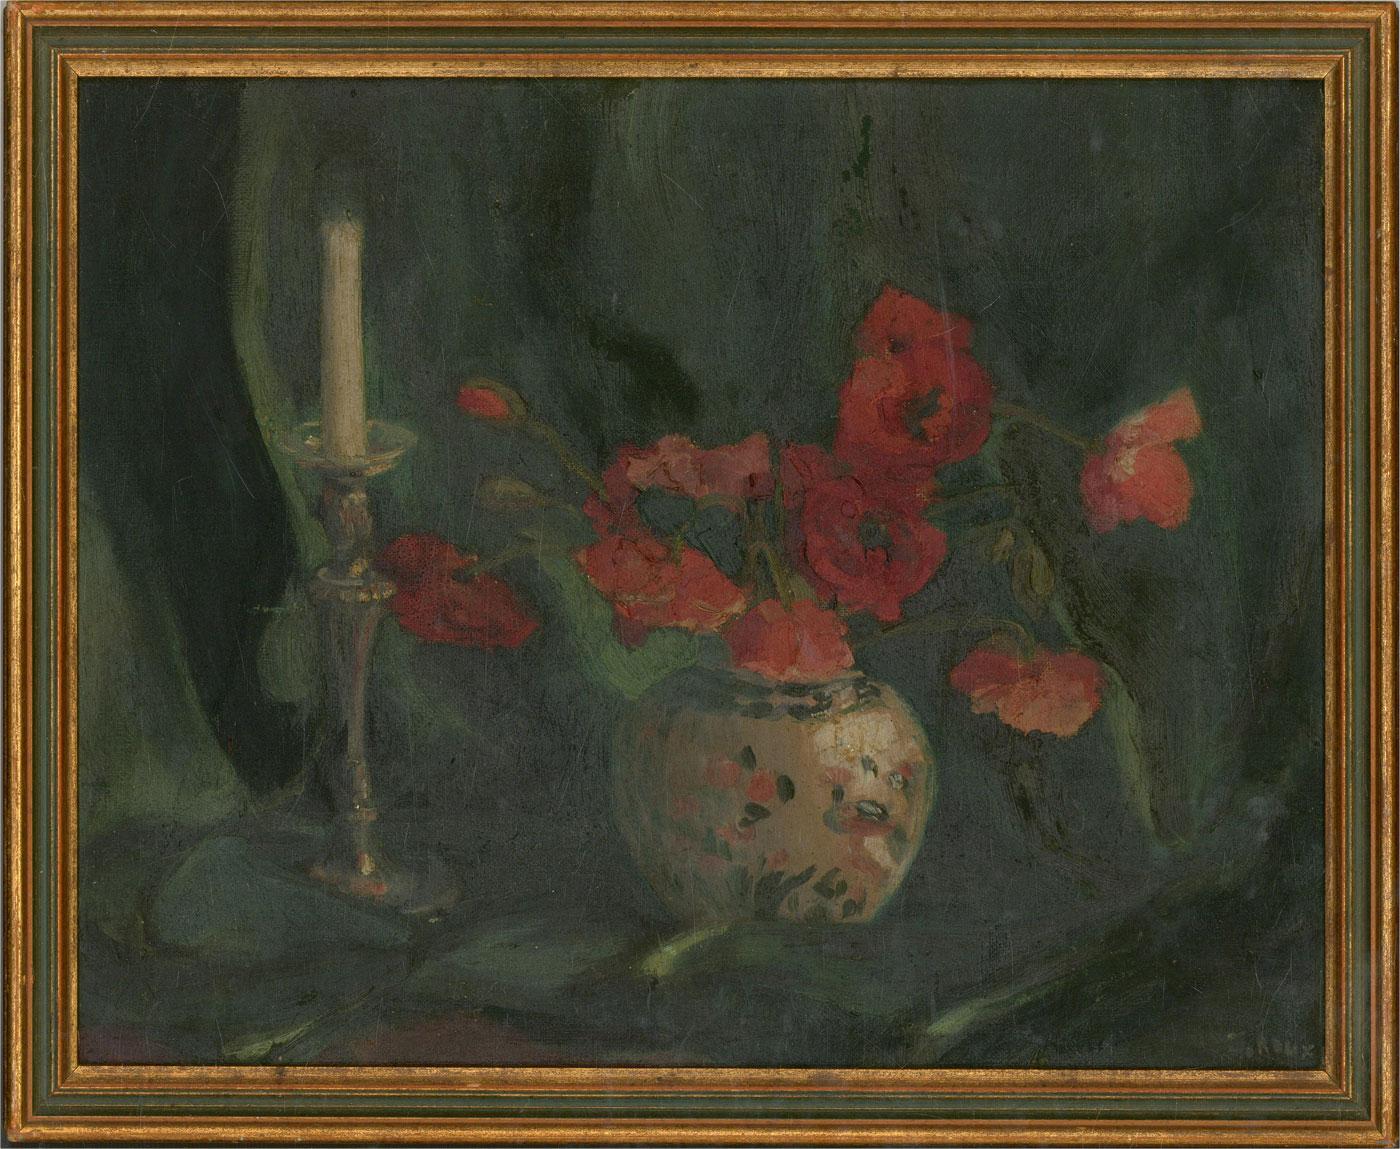 A pretty still life in oil showing a brass candlestick and a patterned vase full of poppies, sitting on green velvet drapery.

The artist has signed indistinctly to the lower right corner and the painting has been presented in a gilt effect frame